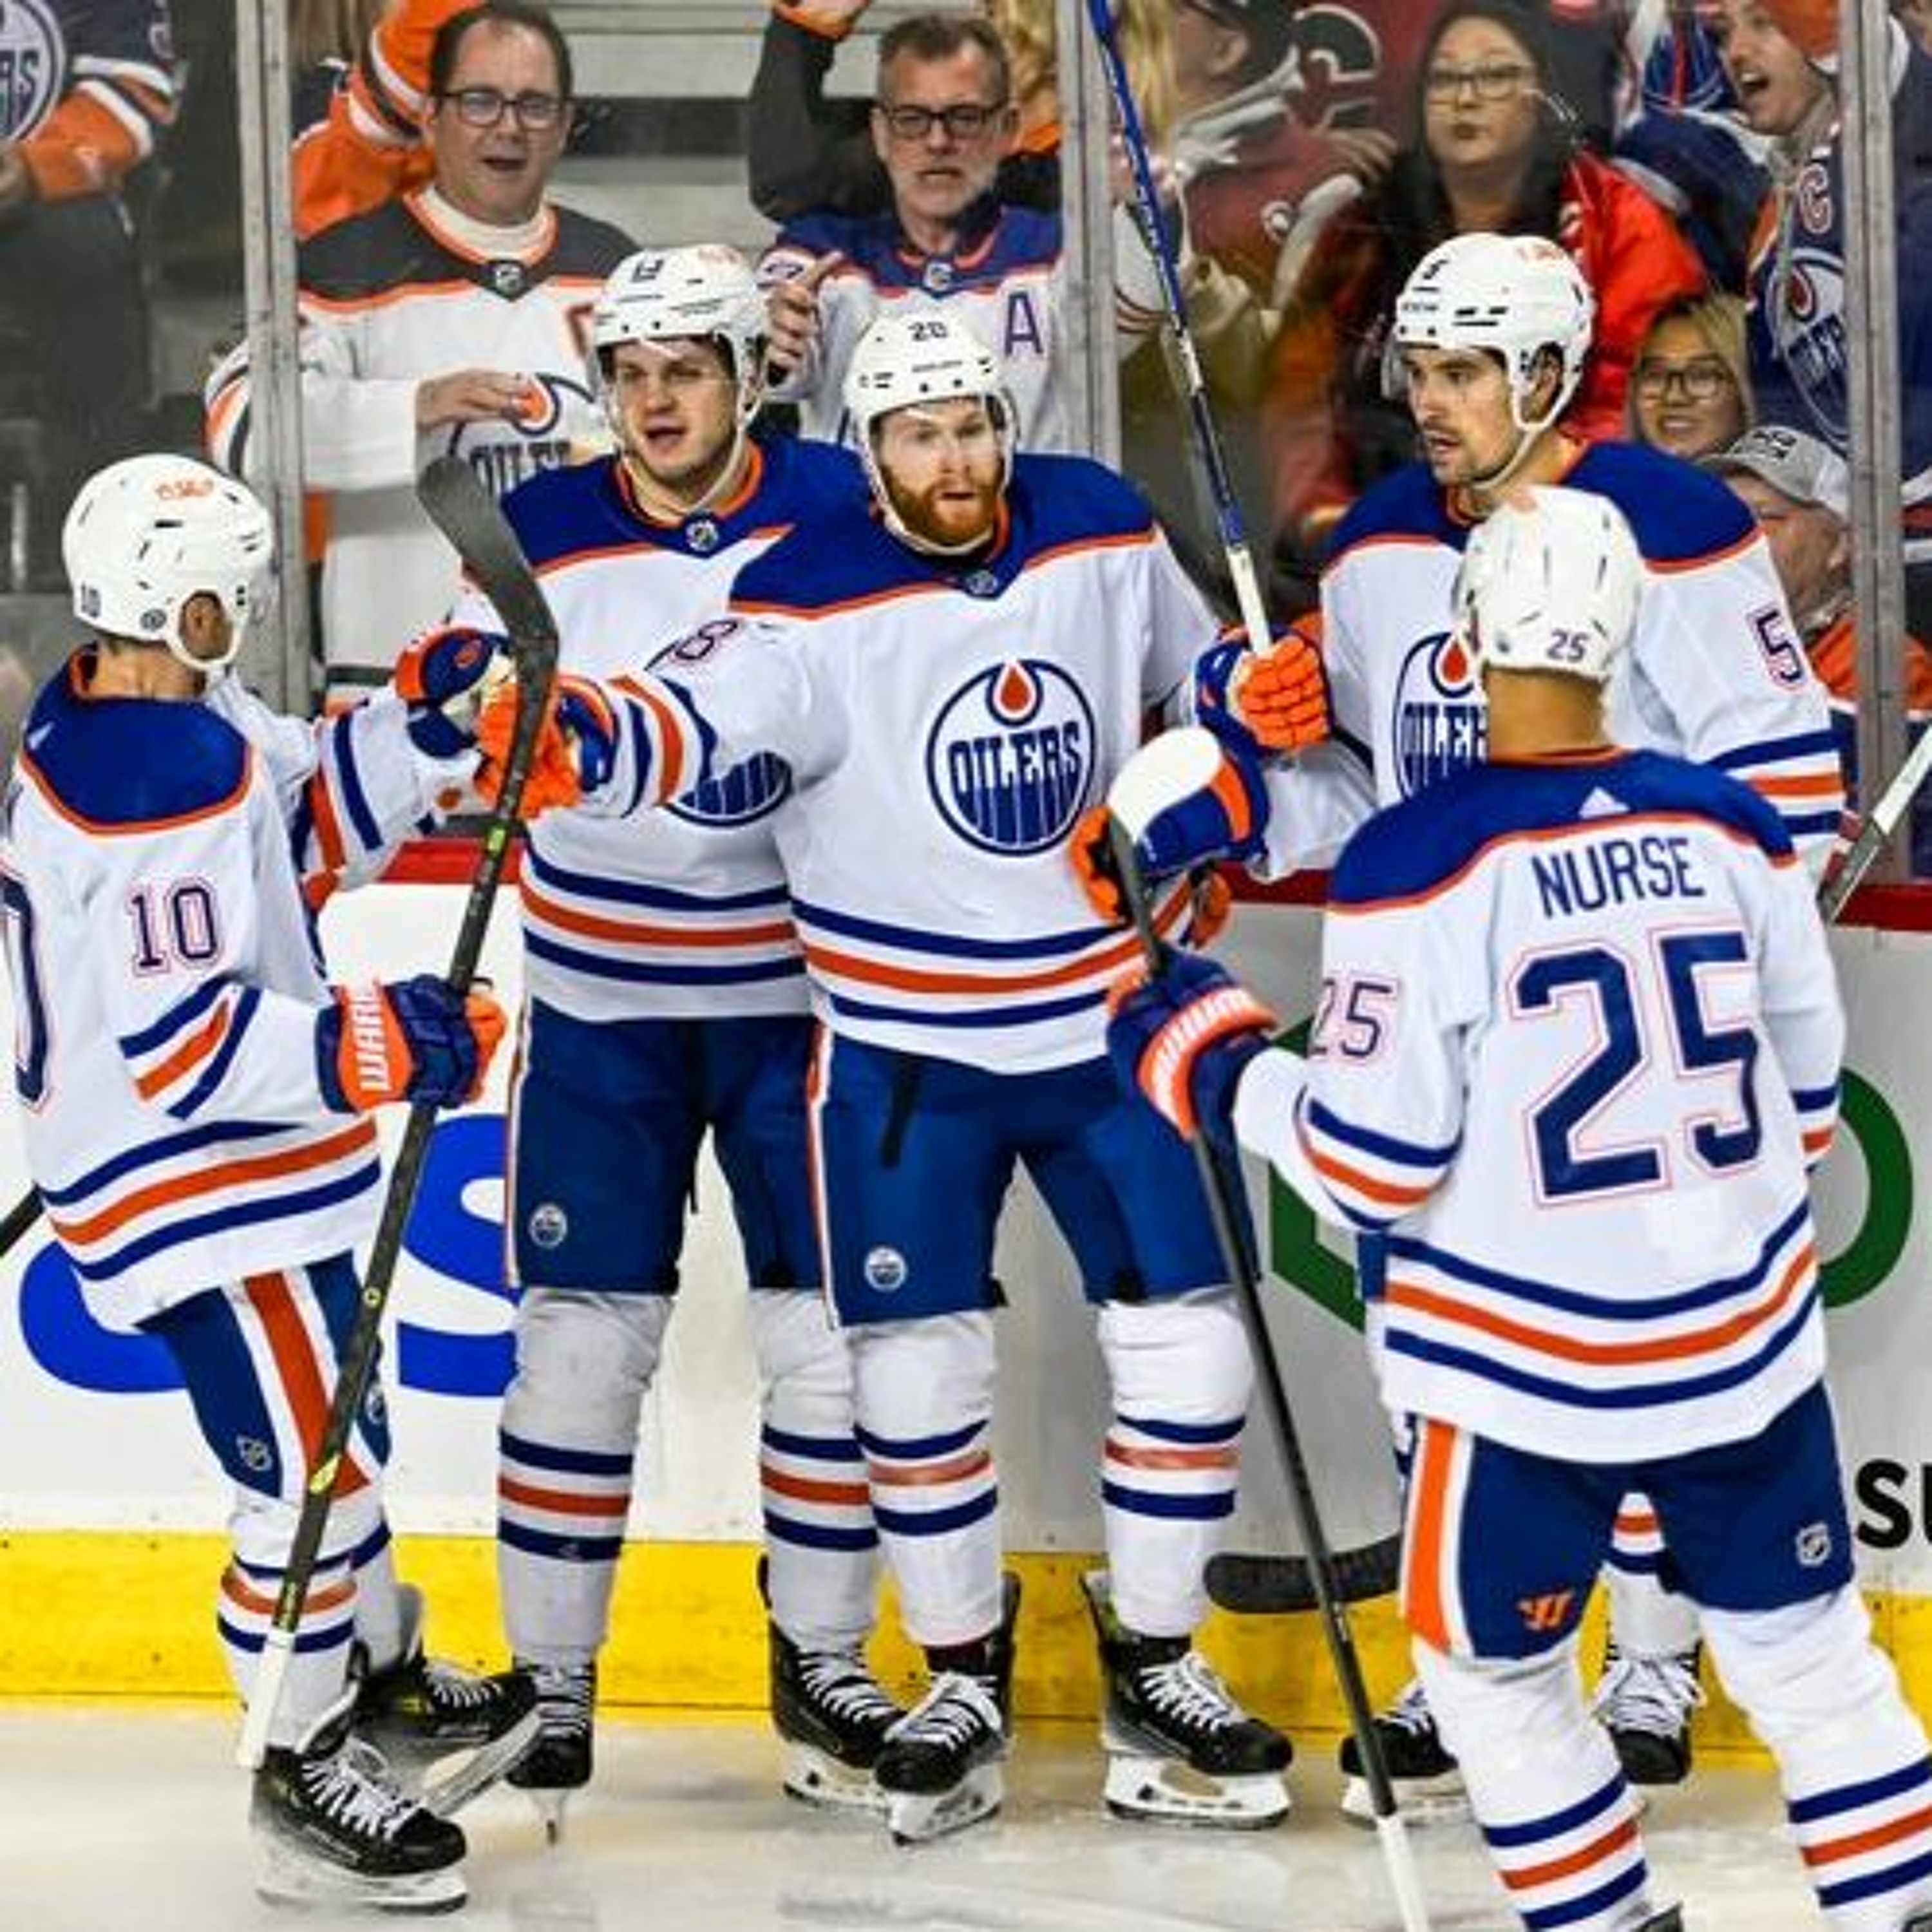 The Cult of Hockey's "Oilers on cruise control, beat Flames 4-2" podcast